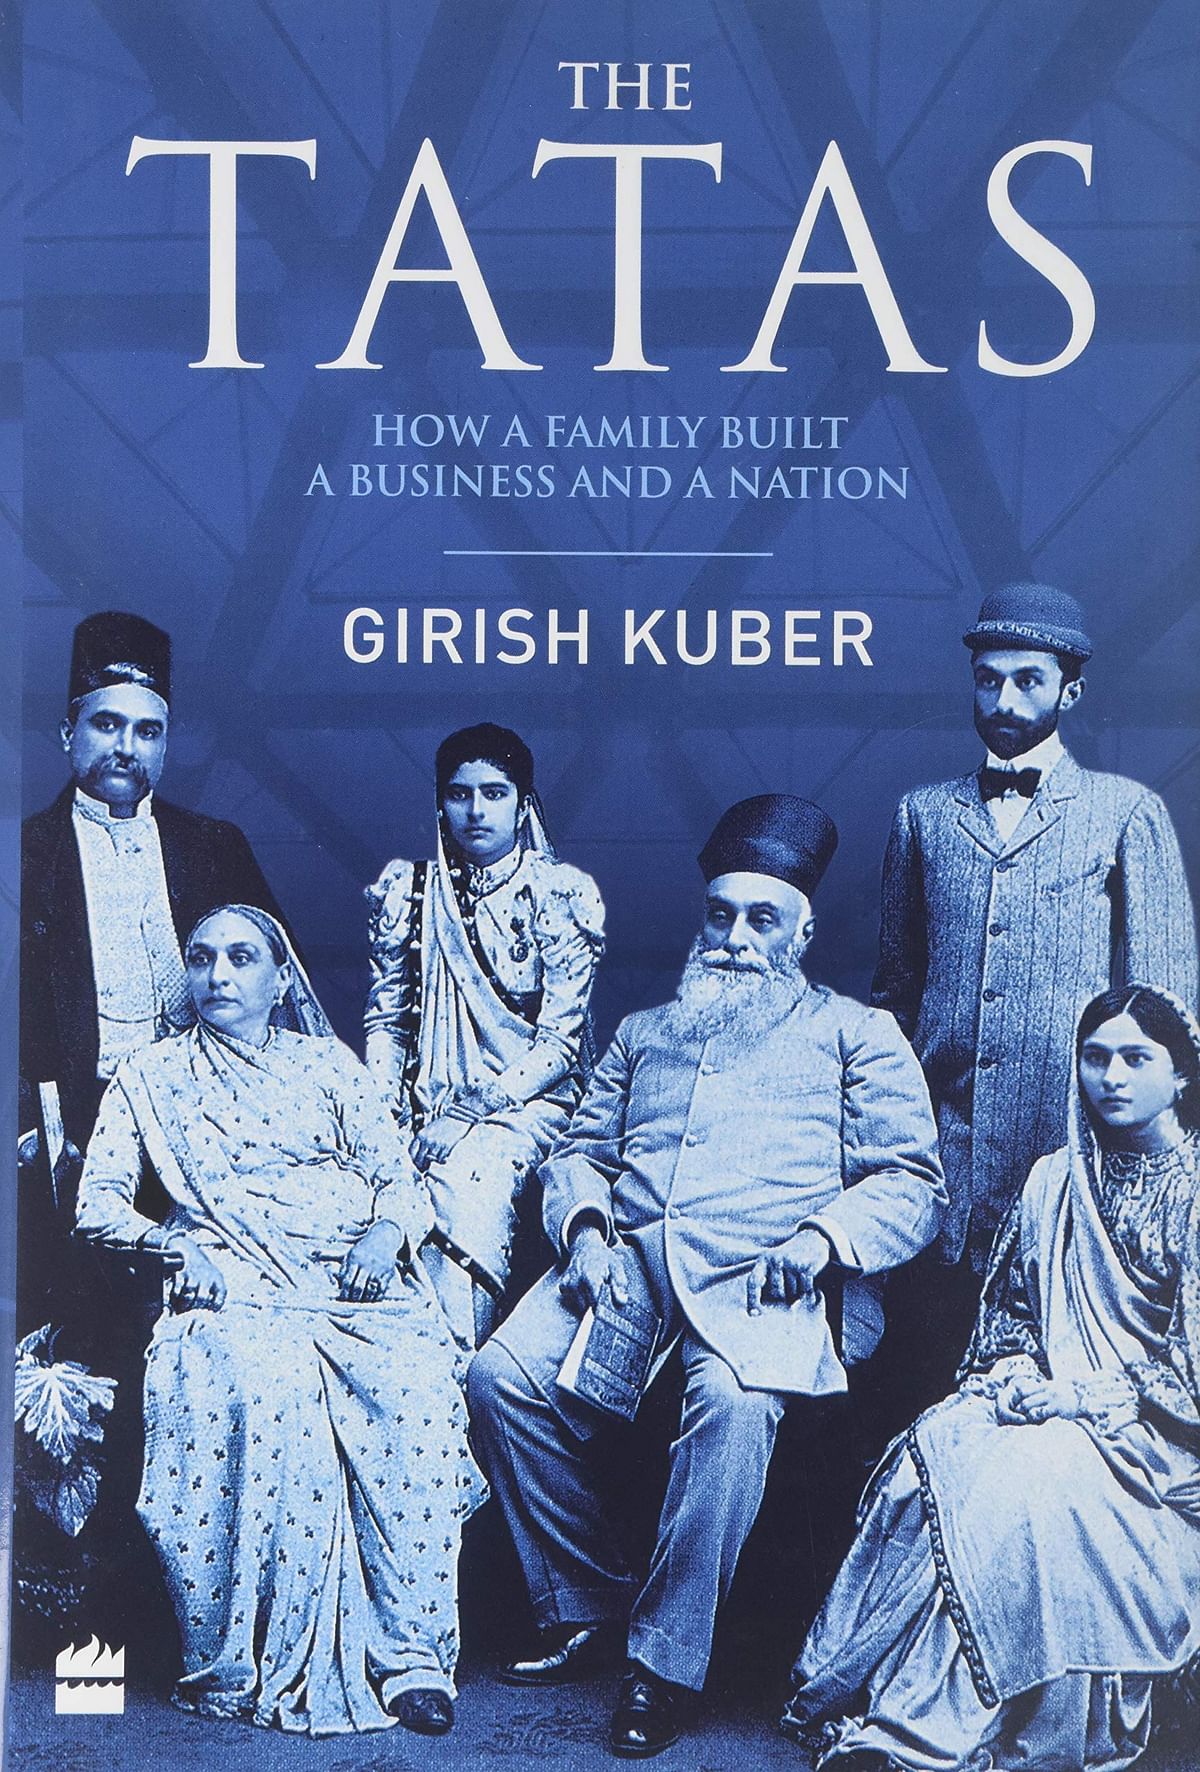 The TATAS - How A Family Built A Business and a Nation